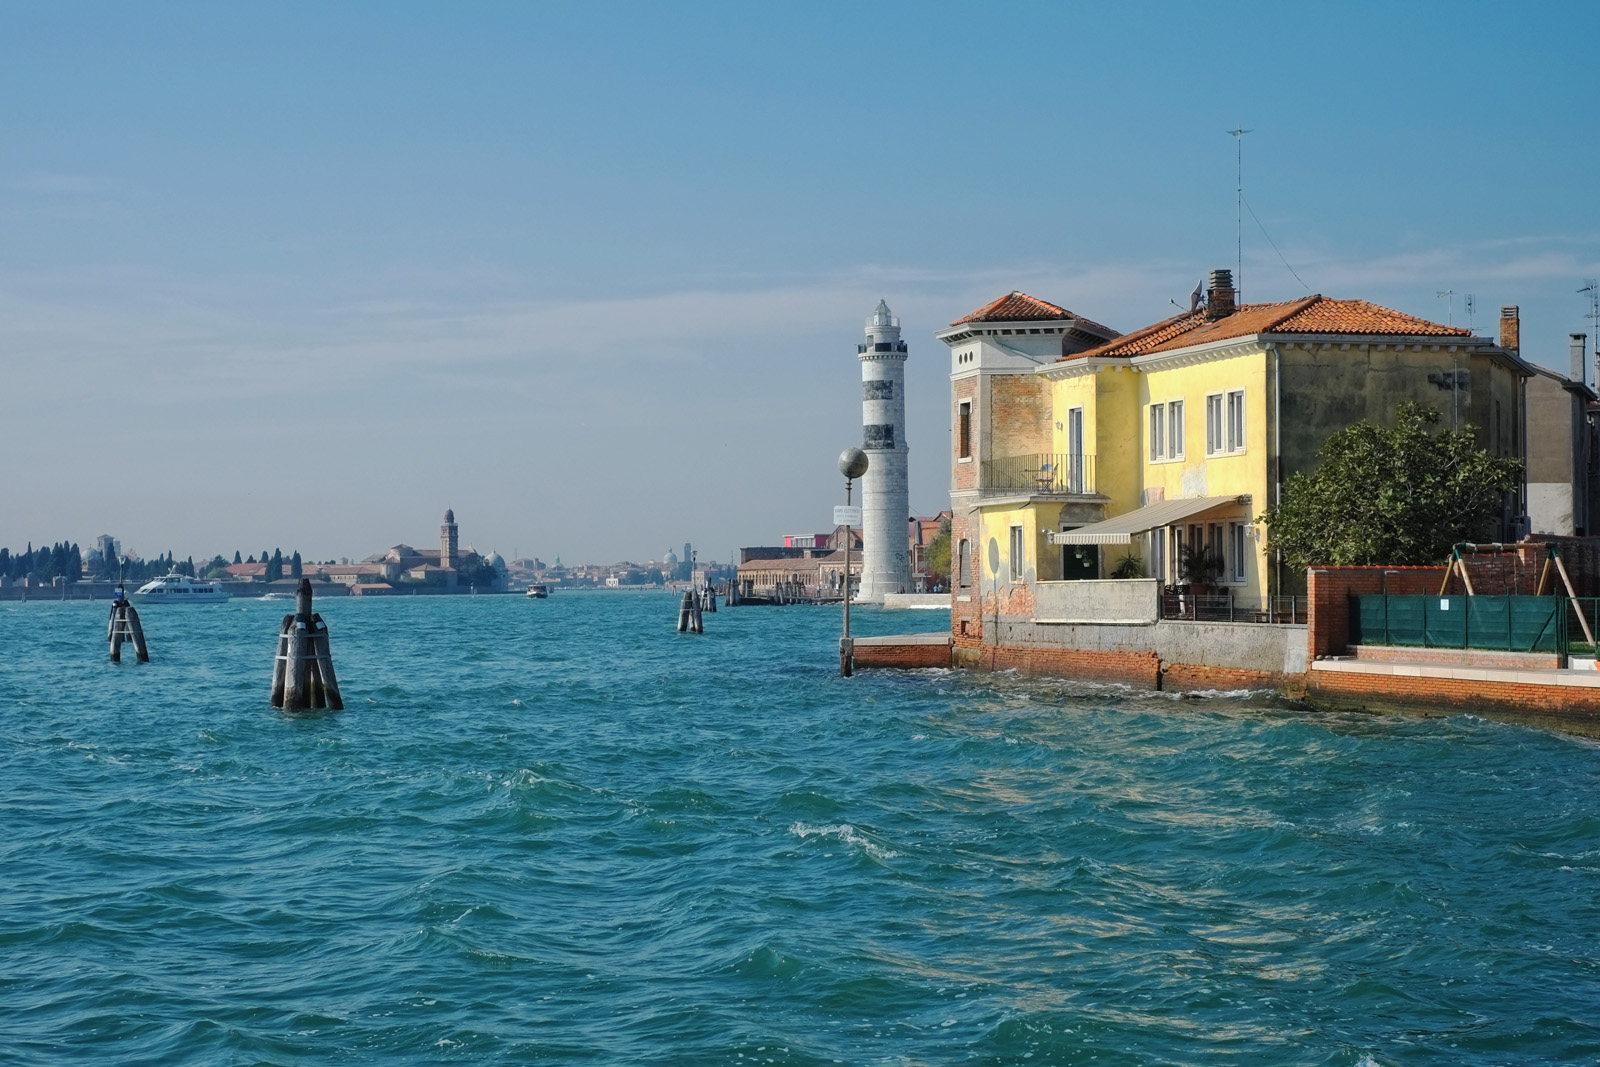 Light House, Murano and Isola di San Michele - Architectural heritage photography by Kent Johnson.